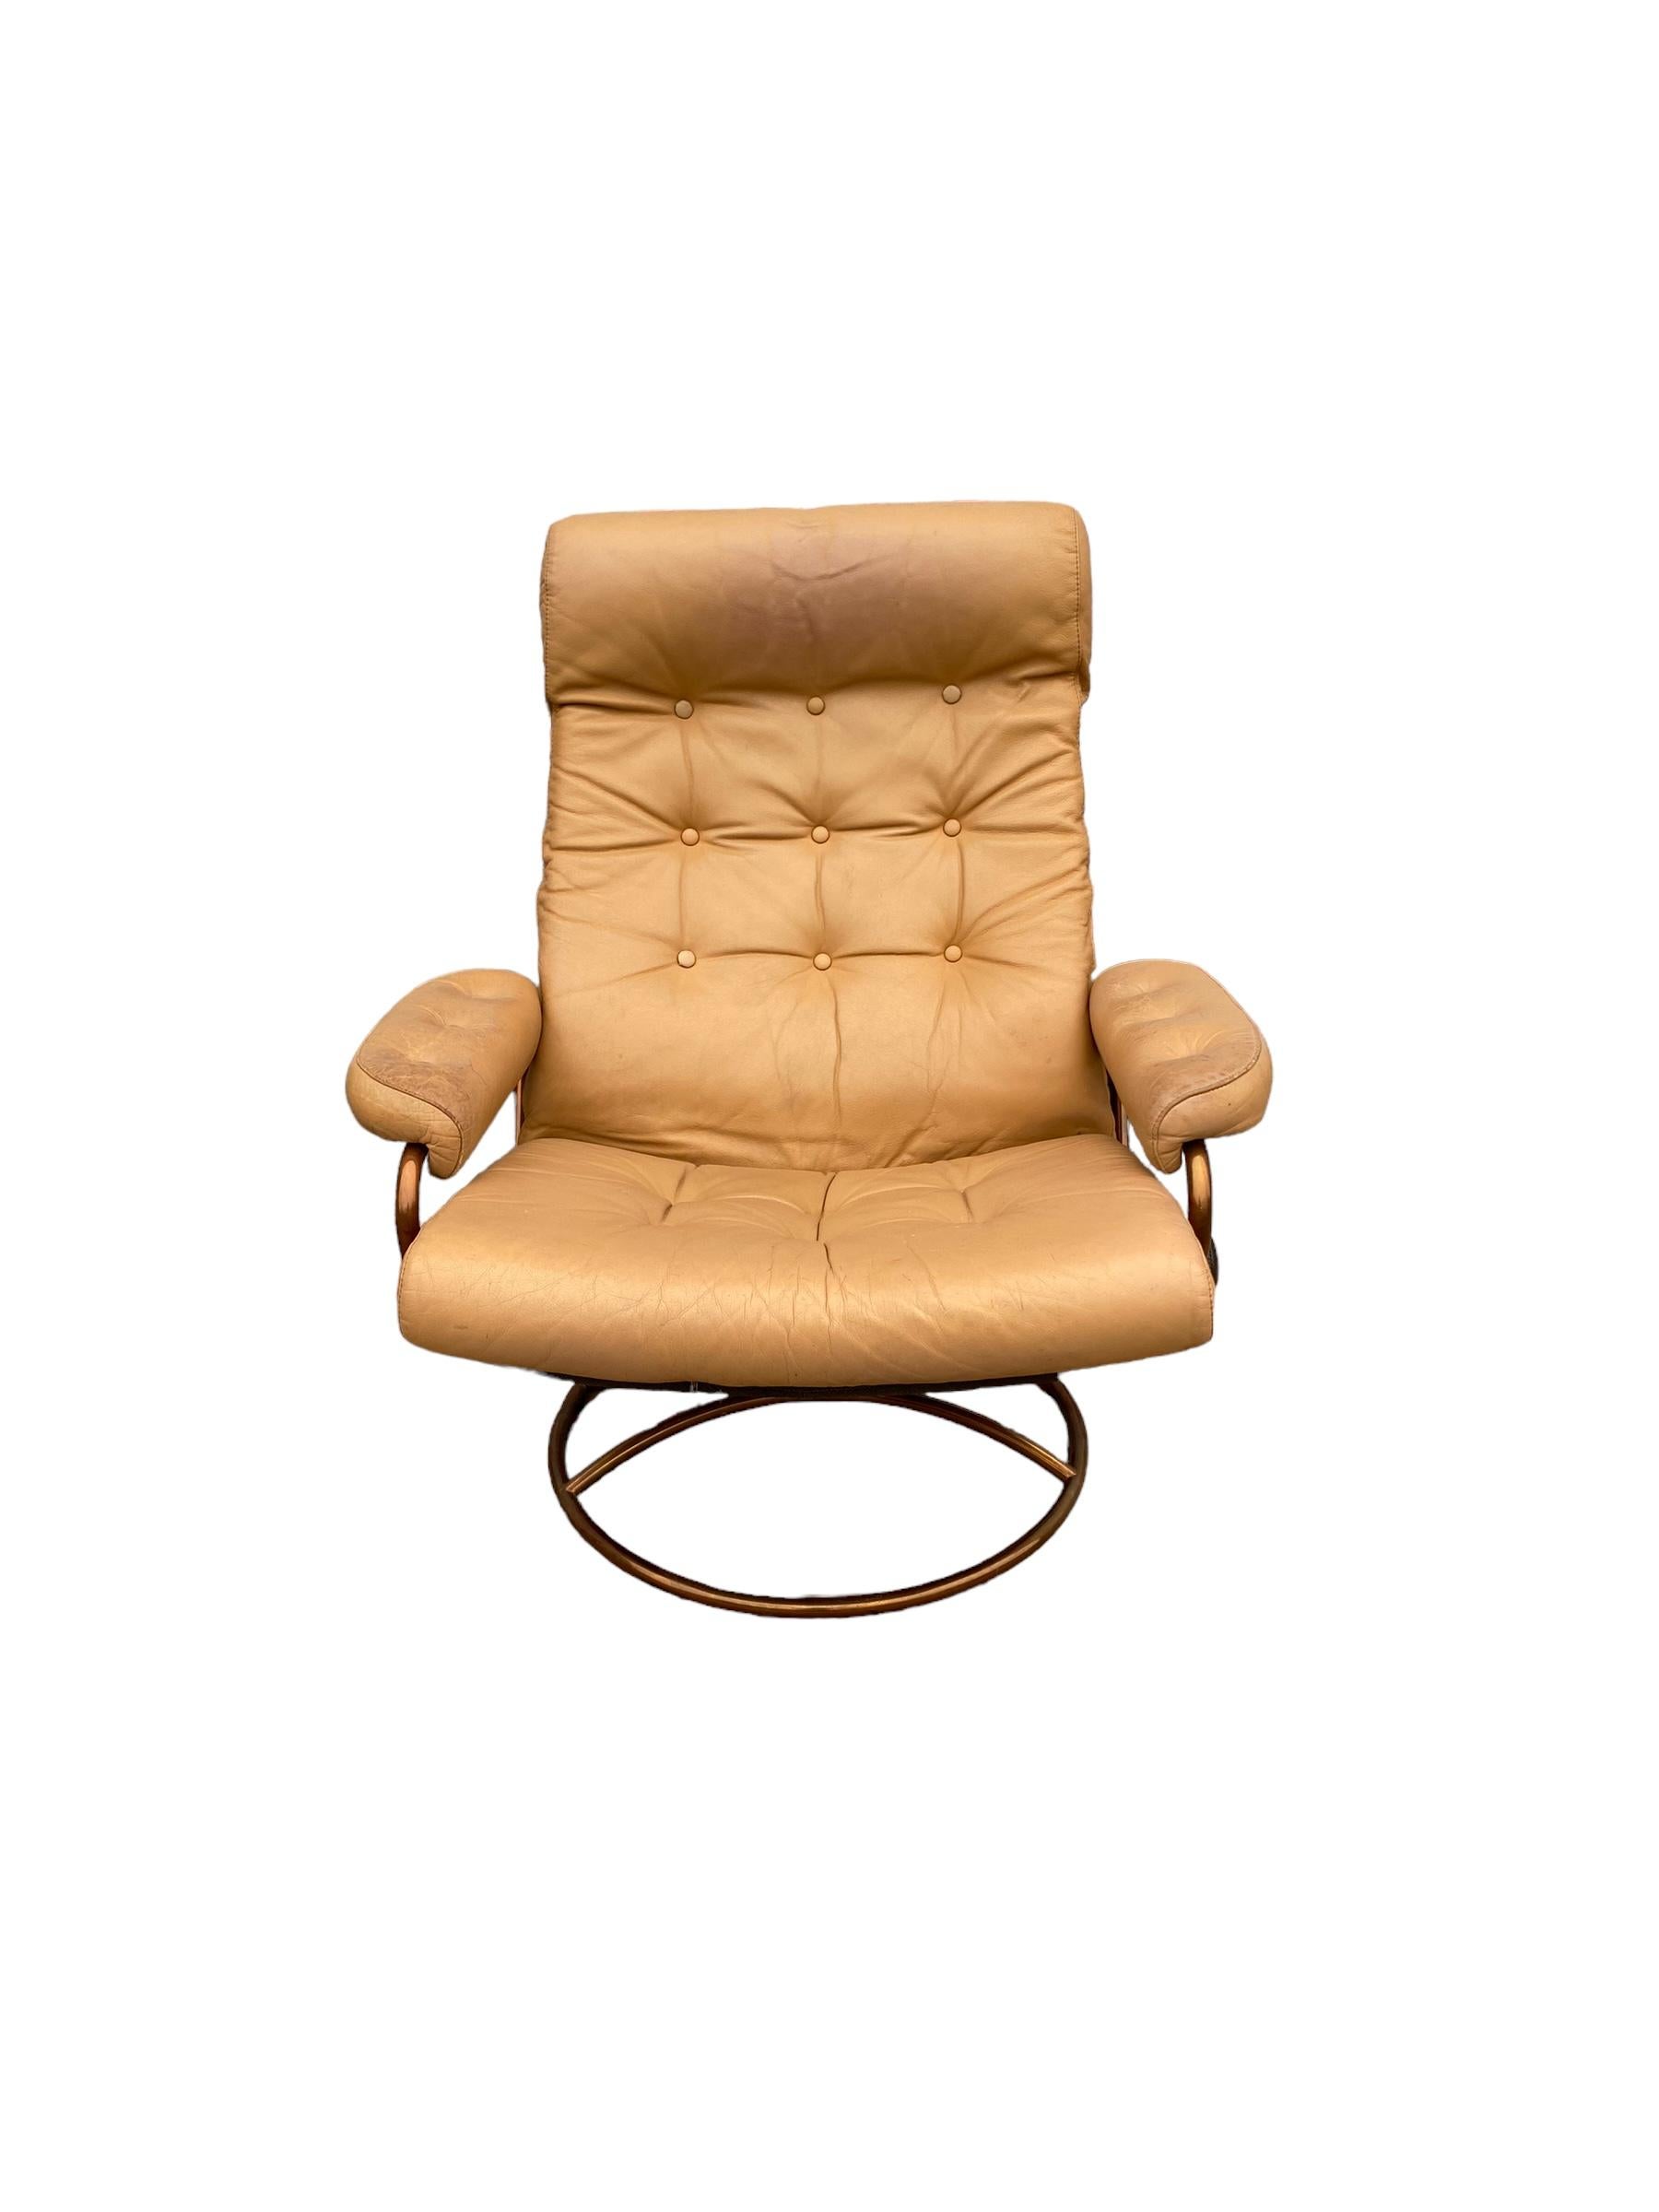 Norwegian Ekornes Stressless Reclining Lounge Chair and Ottoman in Cream with Copper Frame